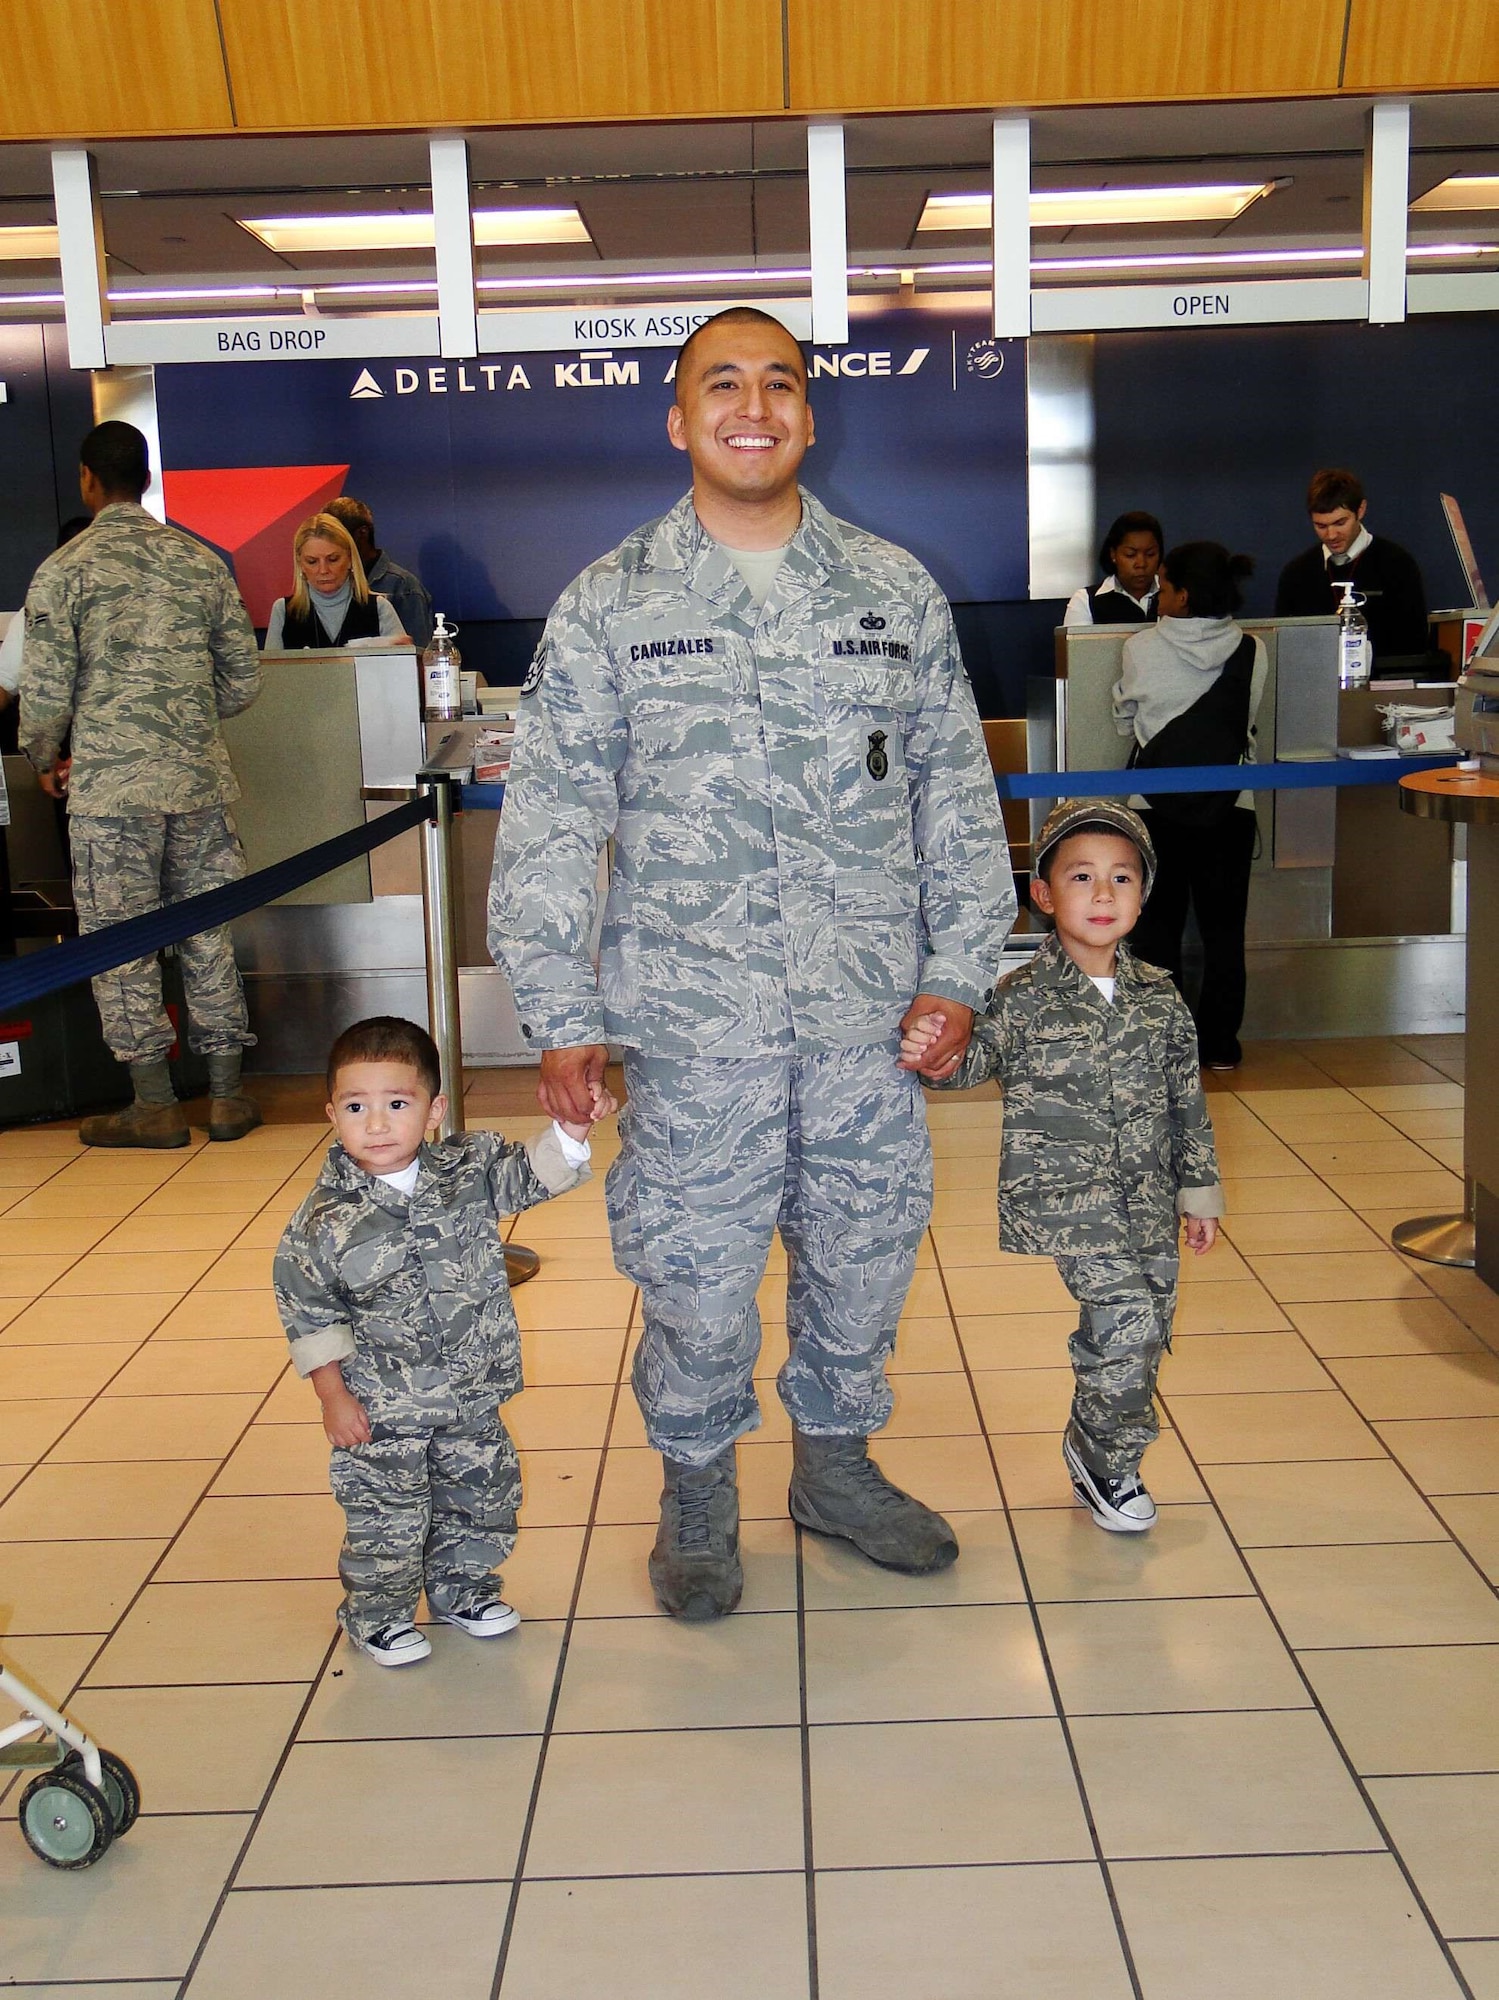 U.S. Air Force Master Sgt. Justin Canizales, 51st Security Forces Squadron plans and programs superintendent, and his children Anthony and Ayden, pose for a photo in 2012. Canizales left for his second deployment while becoming a new father of two. Month of the Military Child annually recognizes the challenges and sacrifices of military children, while highlighting their resilience and dedication. (U.S. Air Force courtesy photo)